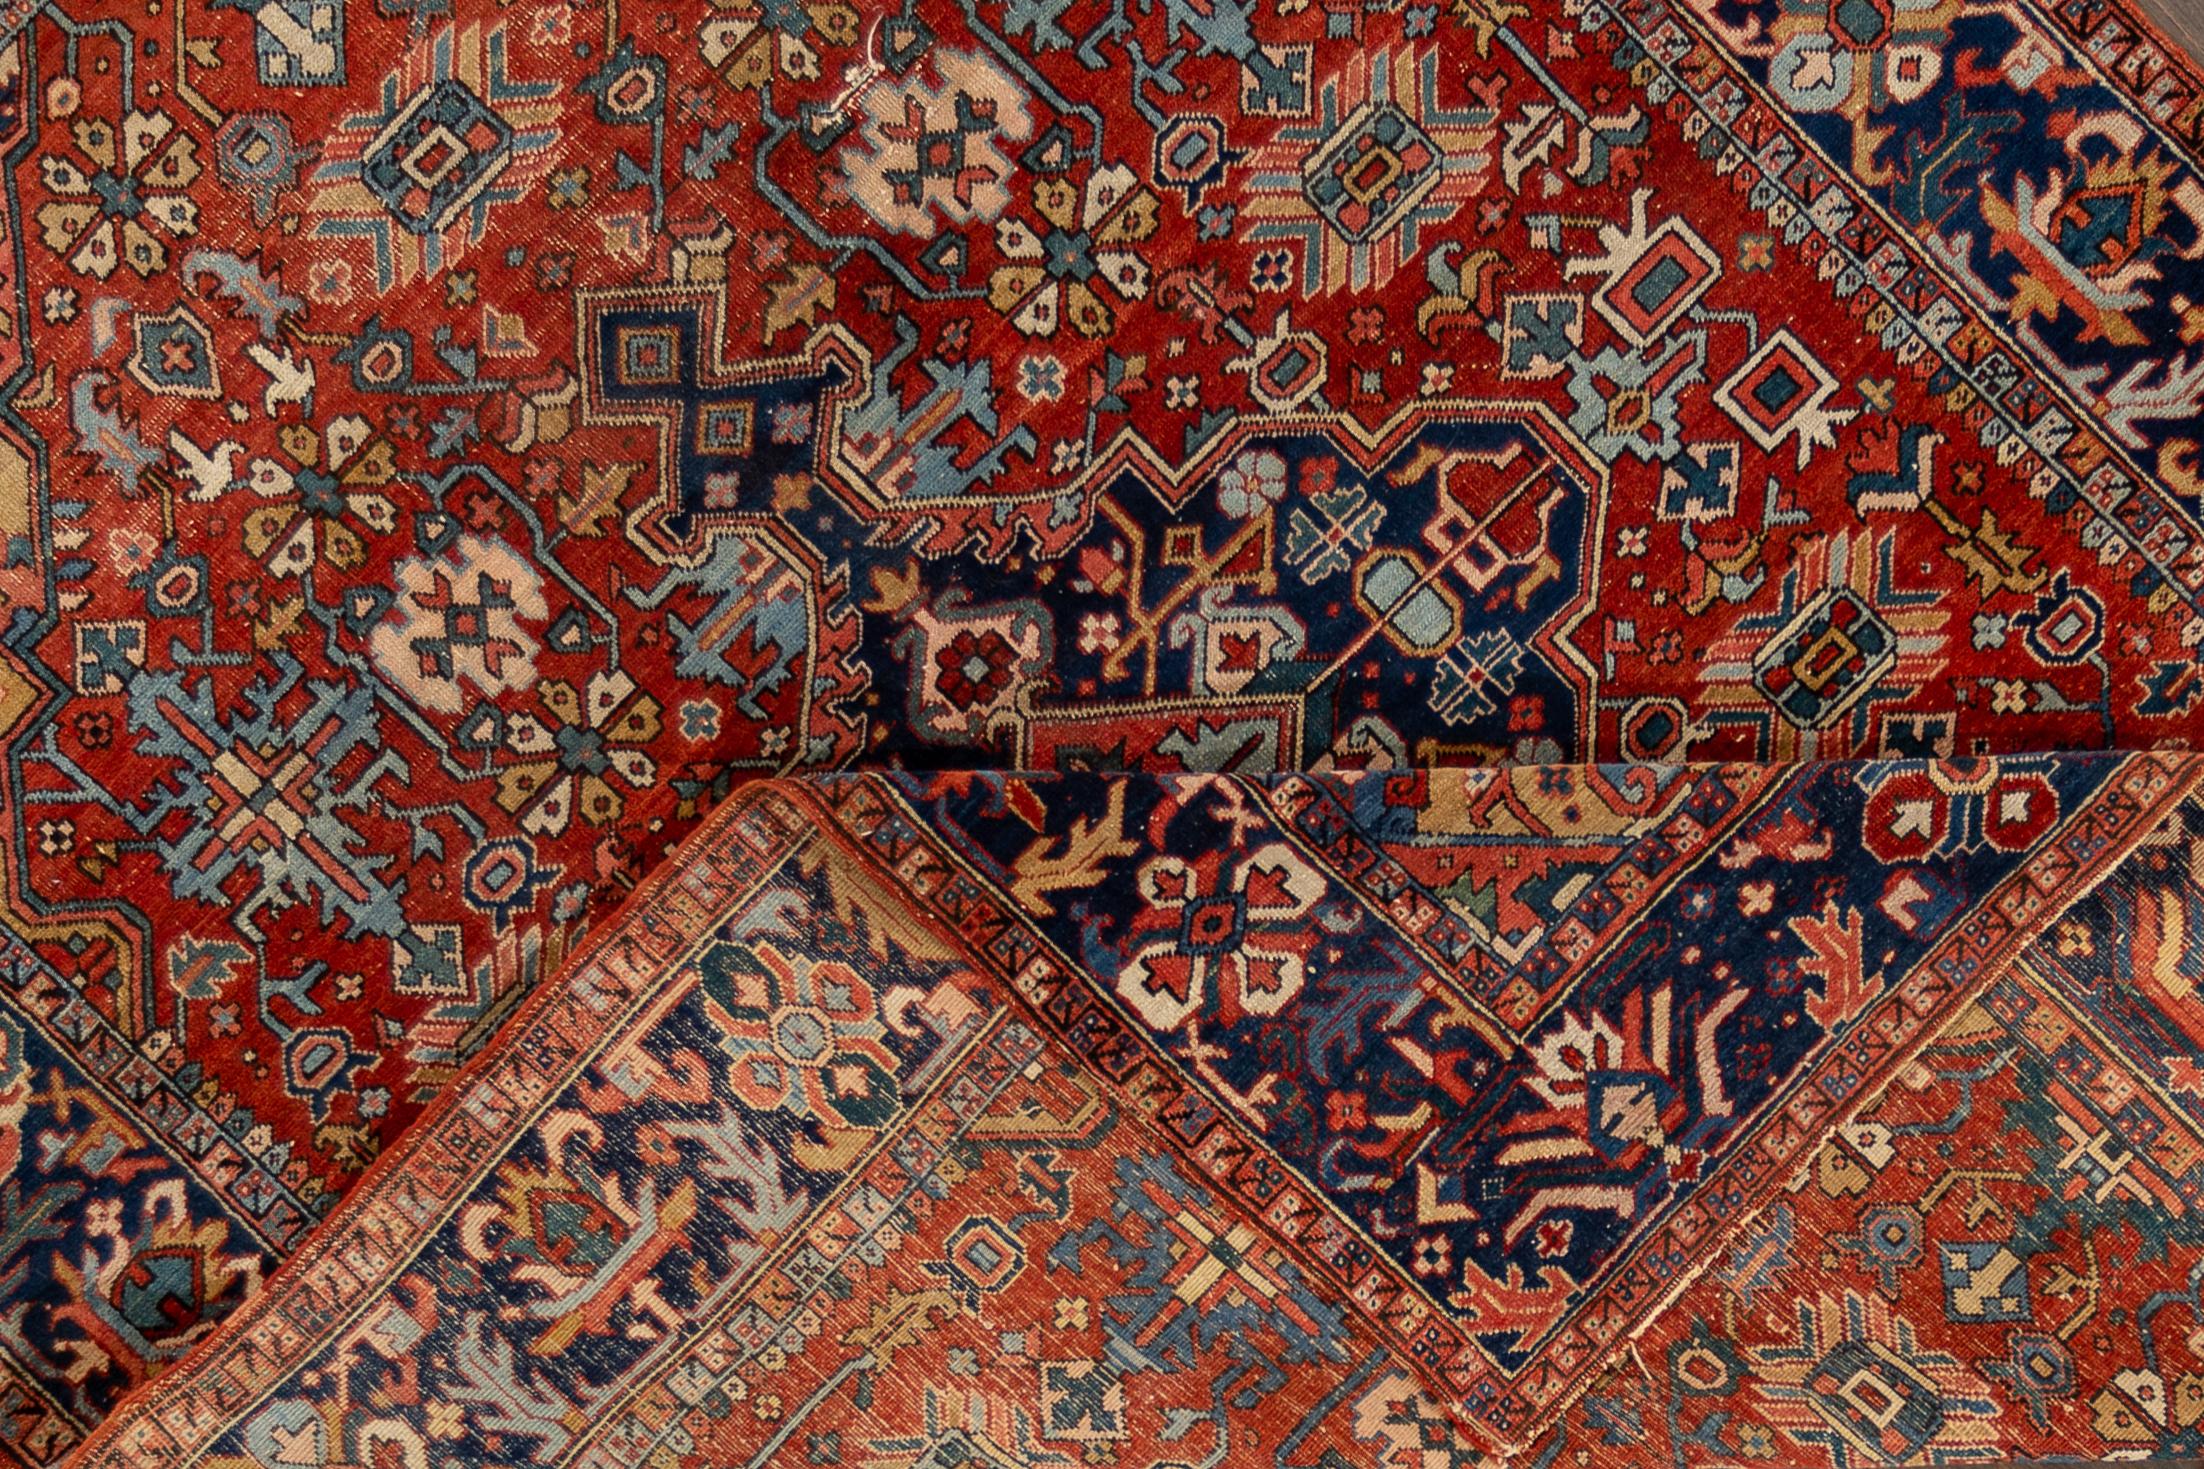 A 20th century vintage Heriz rug with a red field, border and a center medallion motif. This rug measures at 7'4